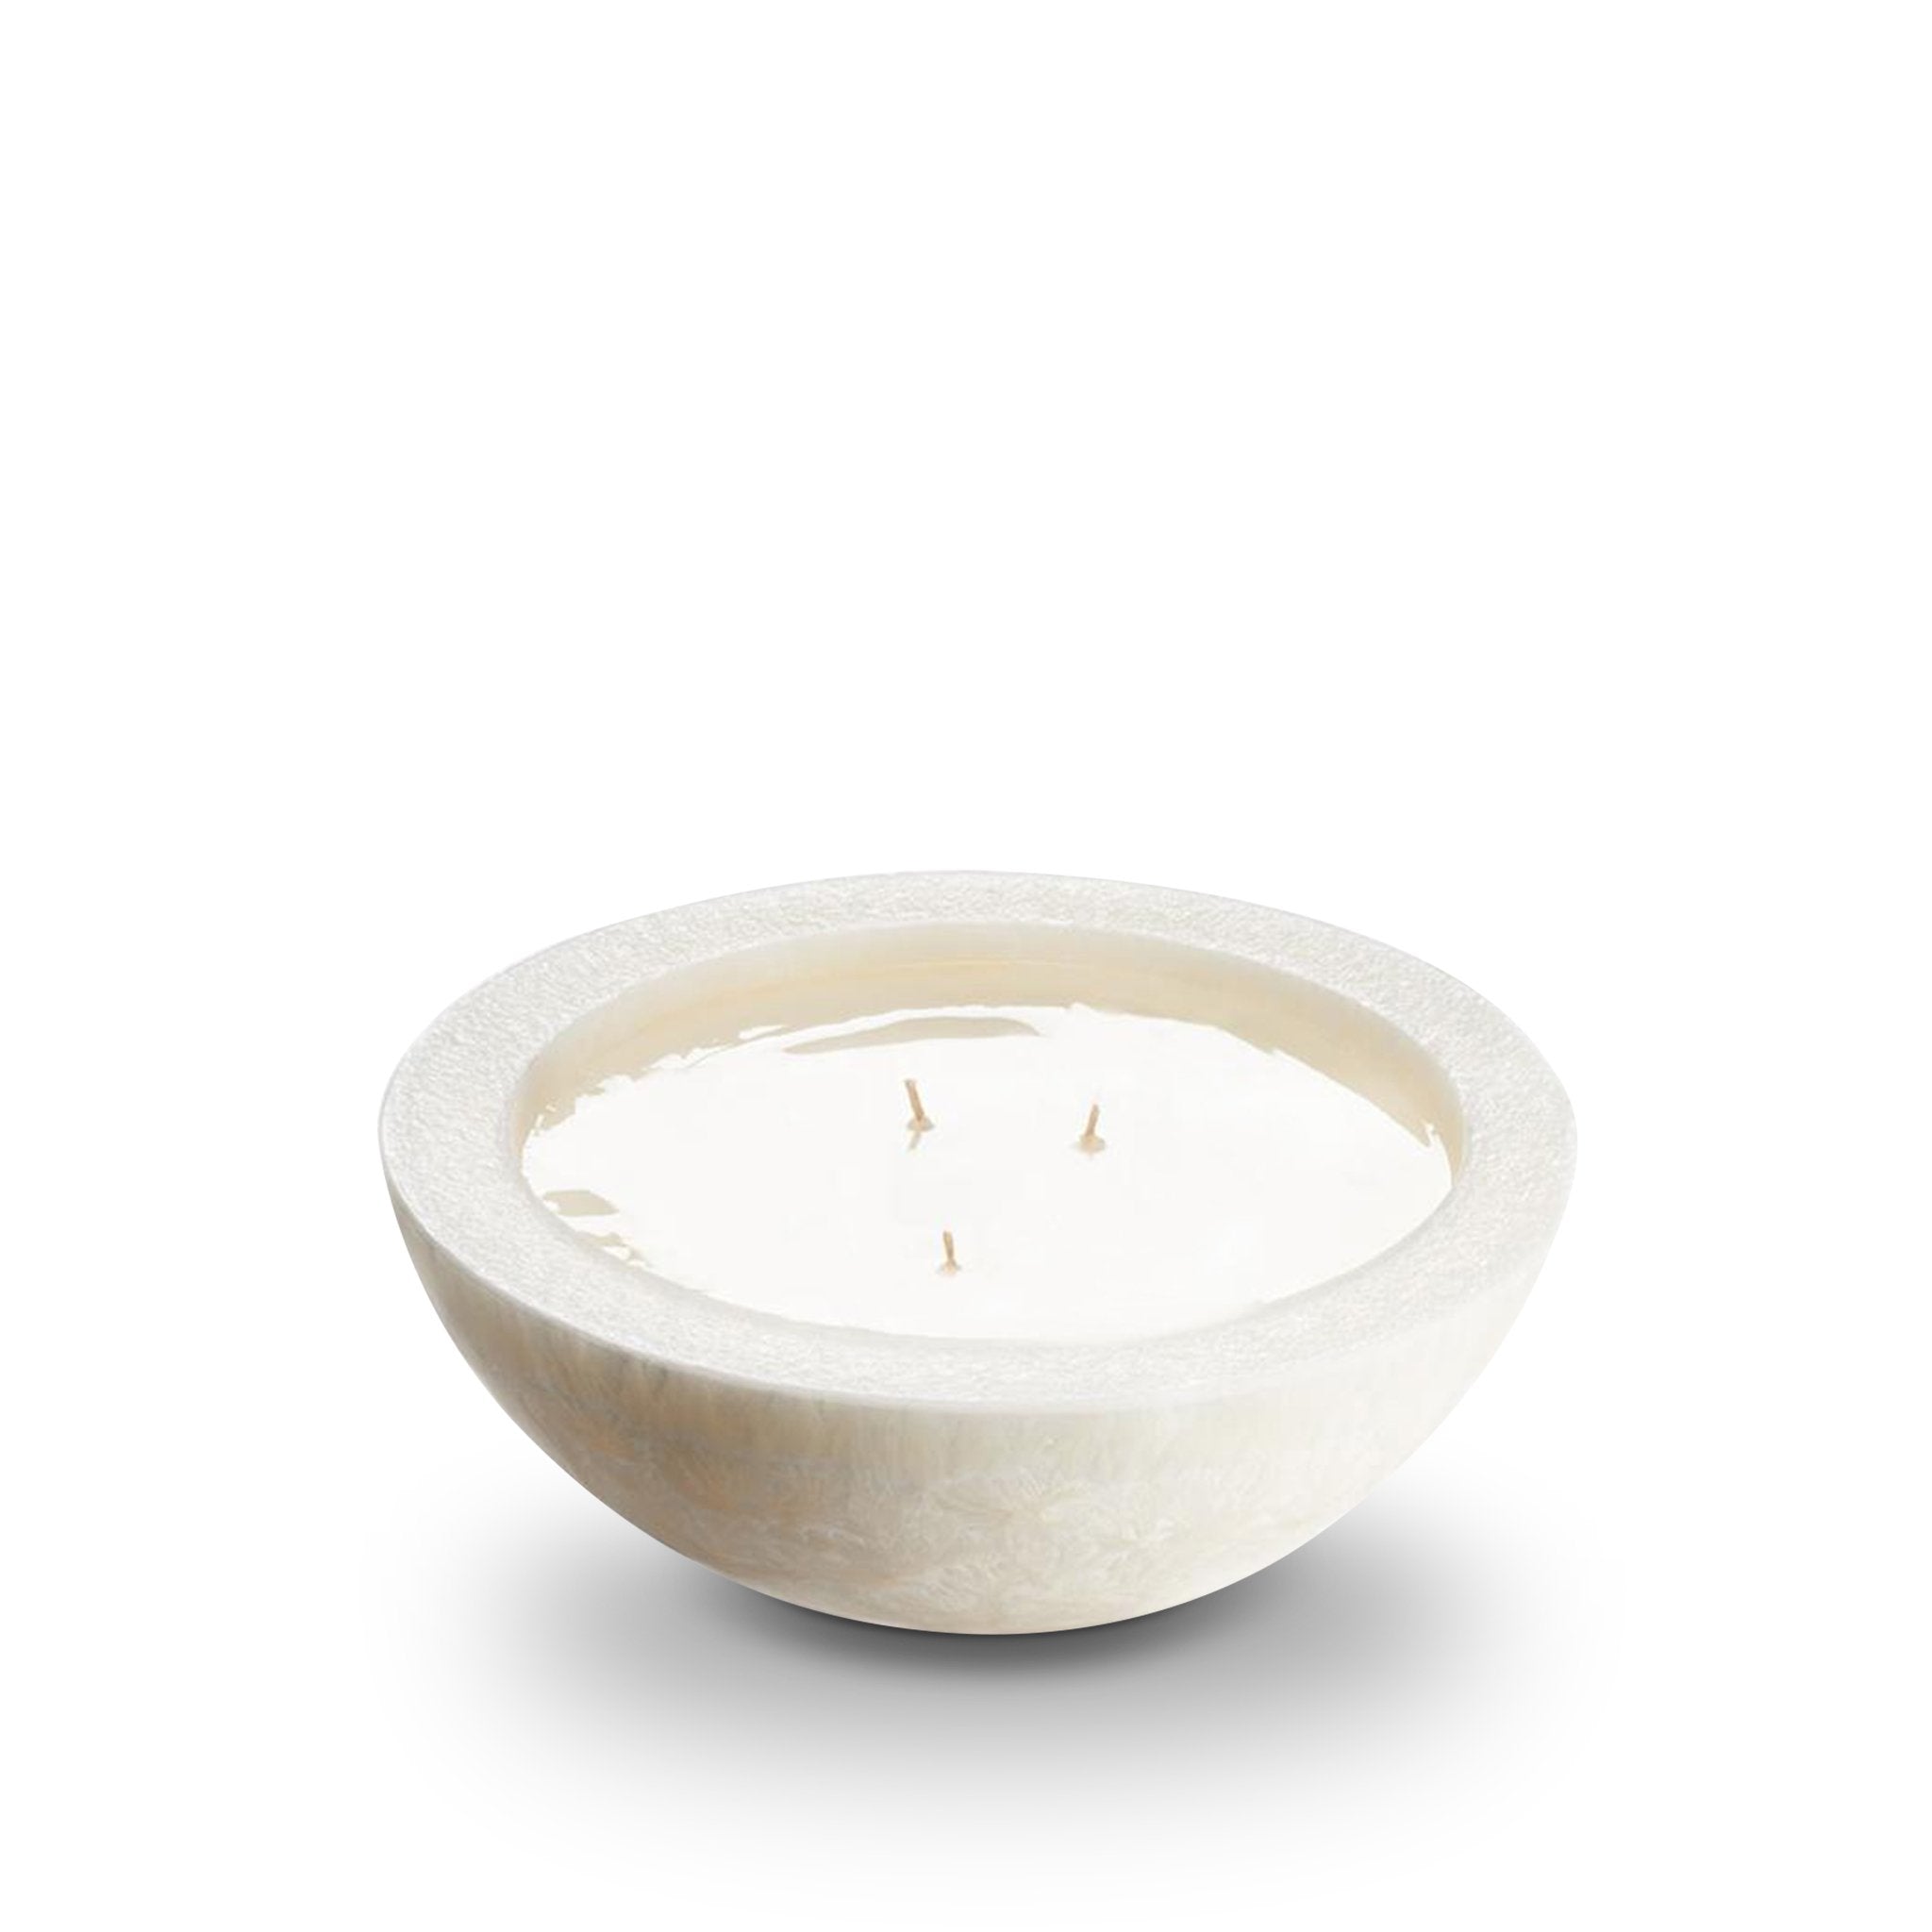 Shop 5 White Ceramic Wick Holders for Oil Candle Design Online